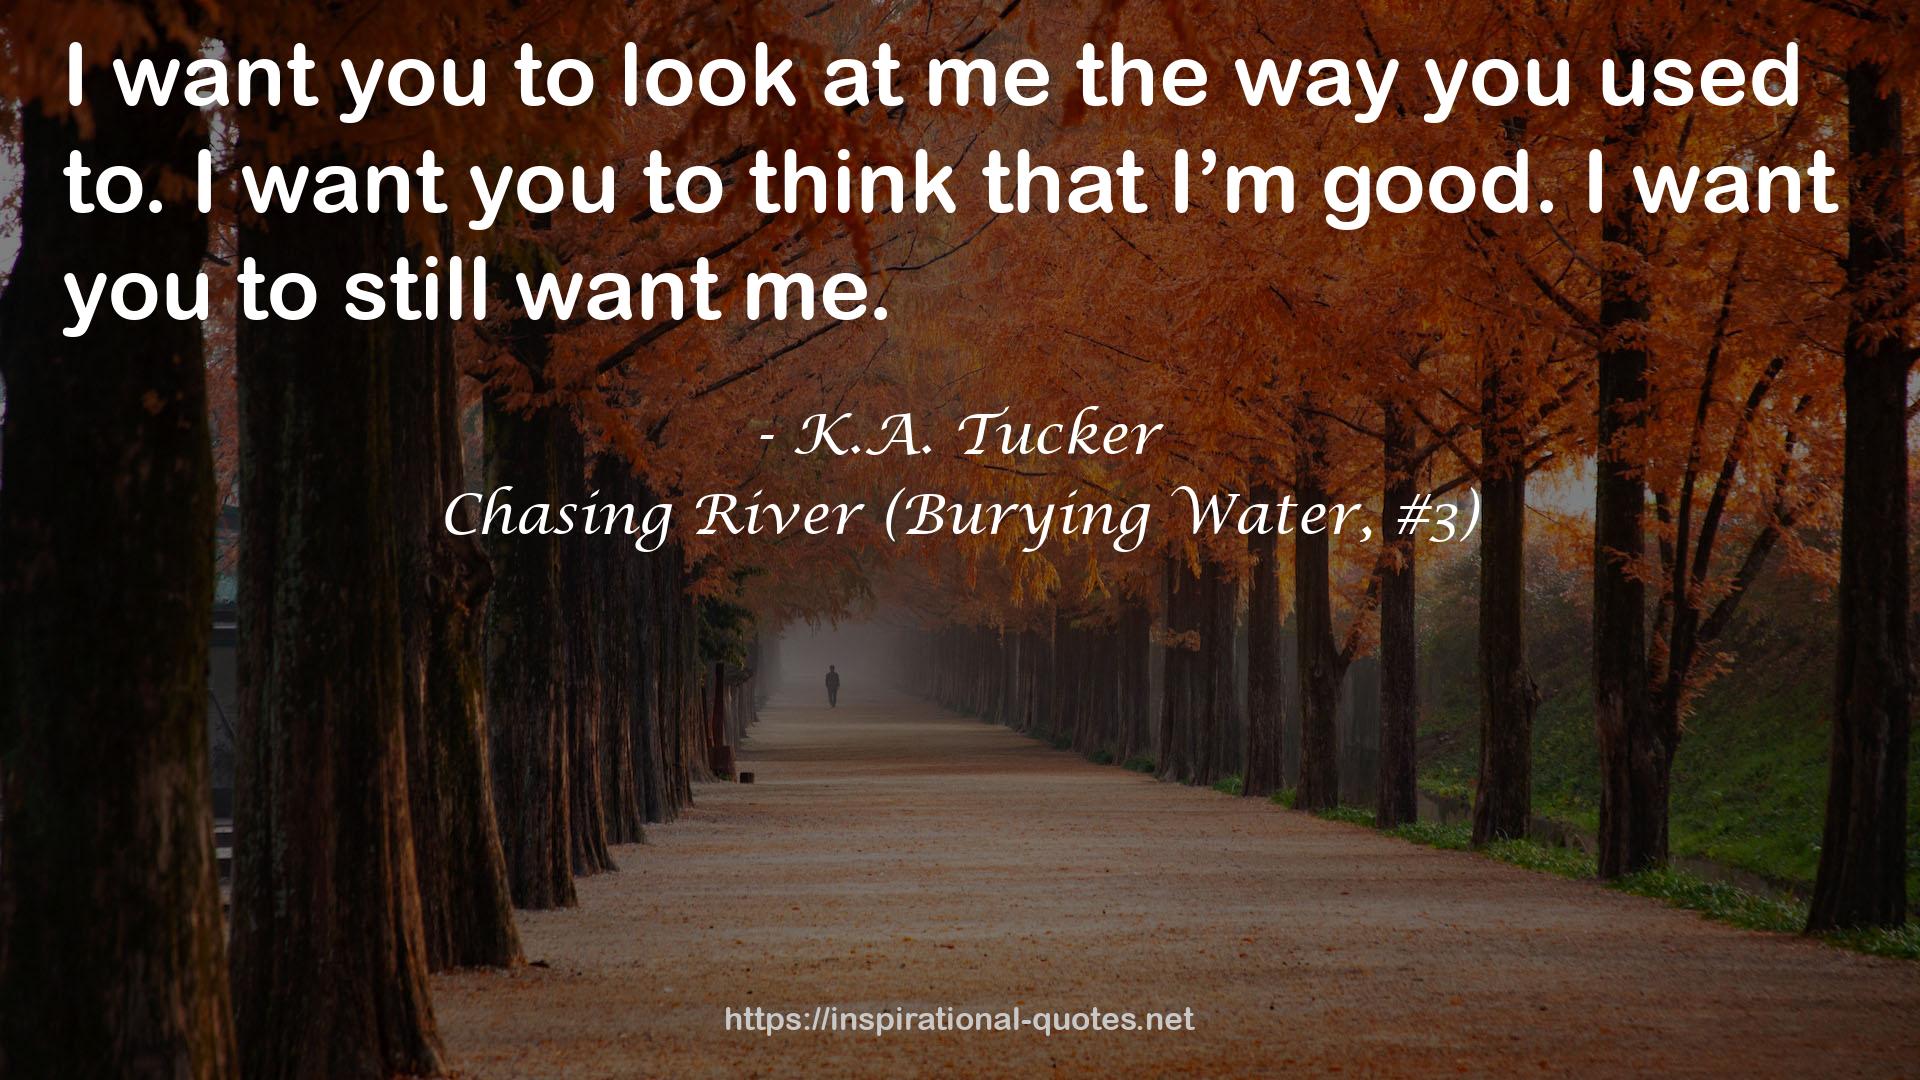 Chasing River (Burying Water, #3) QUOTES